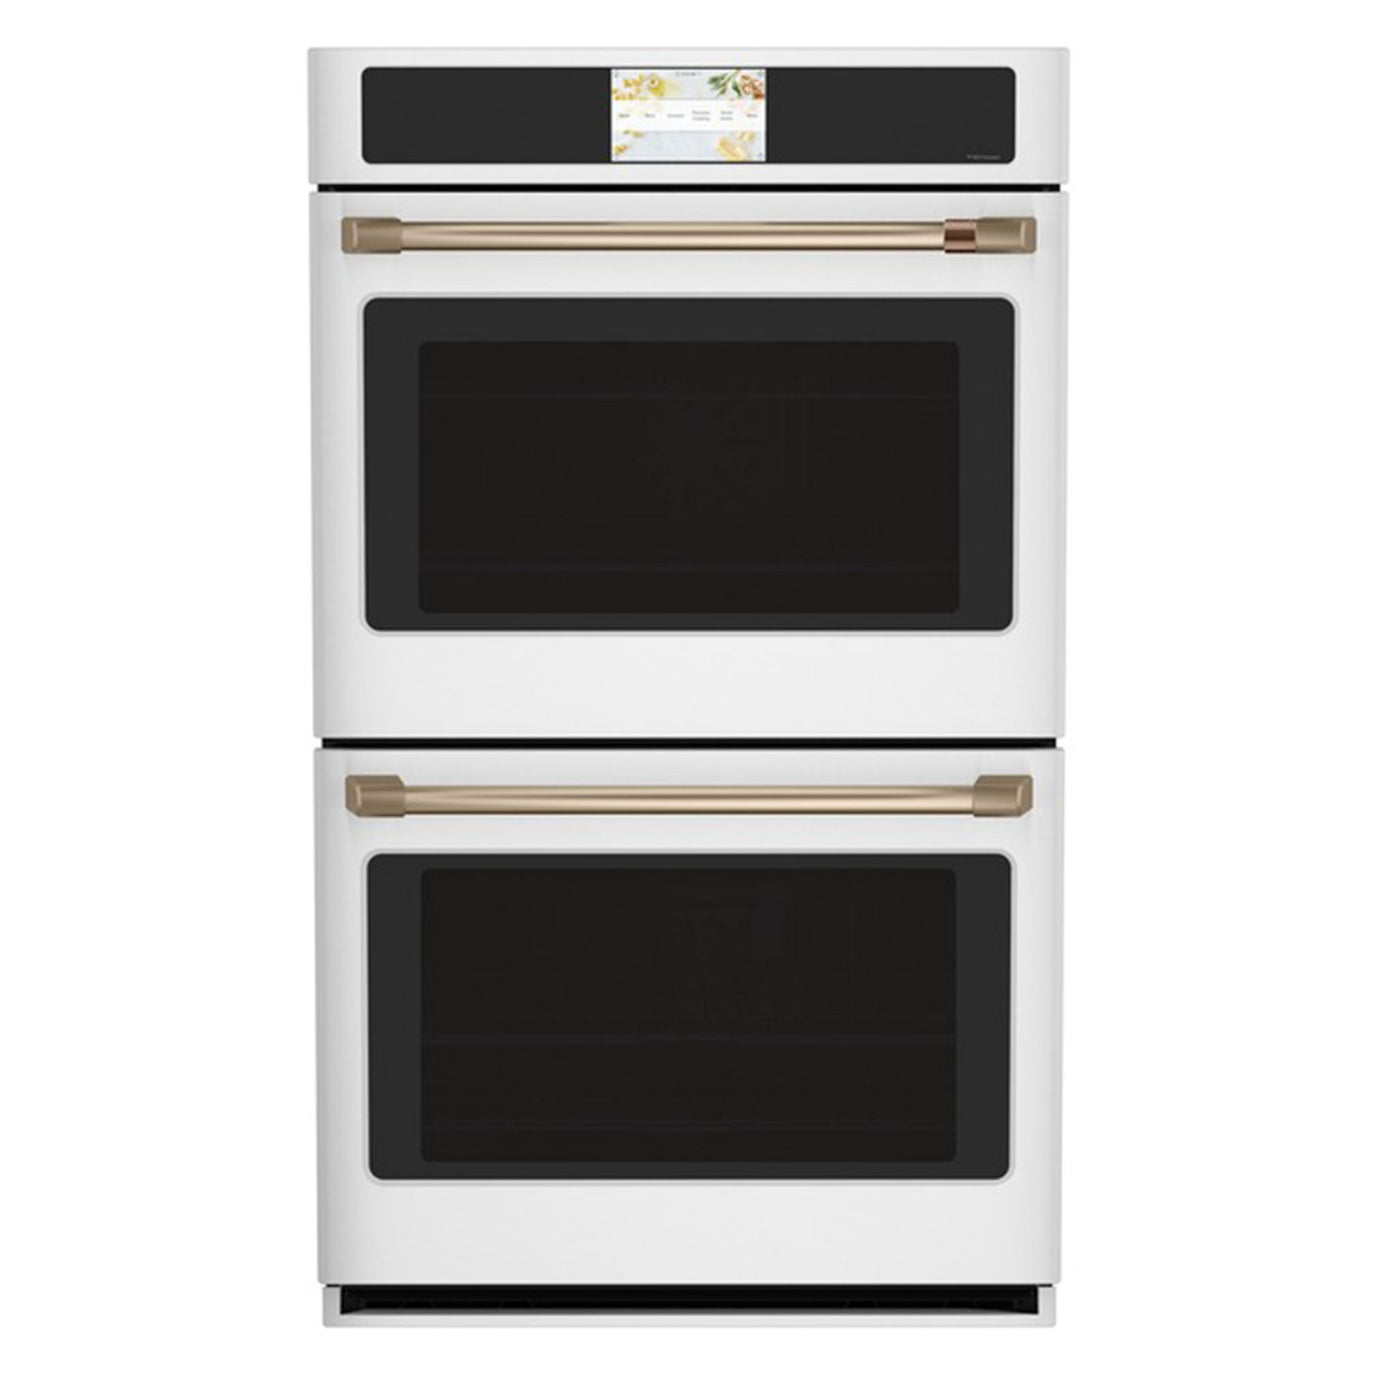 30" Café™ Professional Series Smart Built-In Convection Double Wall Oven